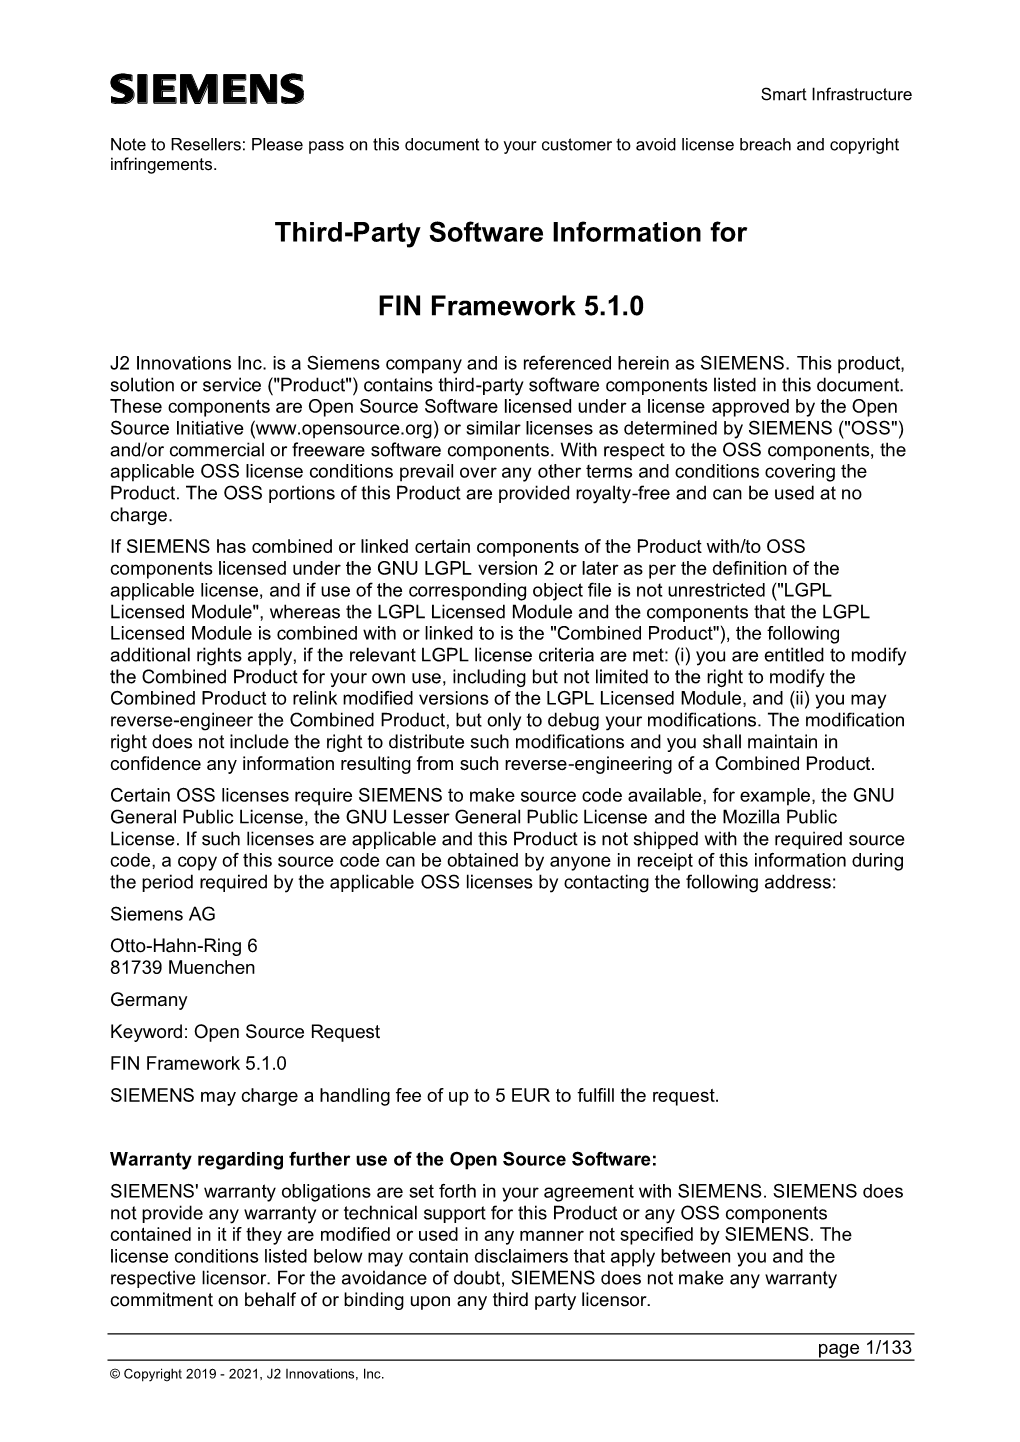 Third-Party Software Information for FIN Framework 5.1.0